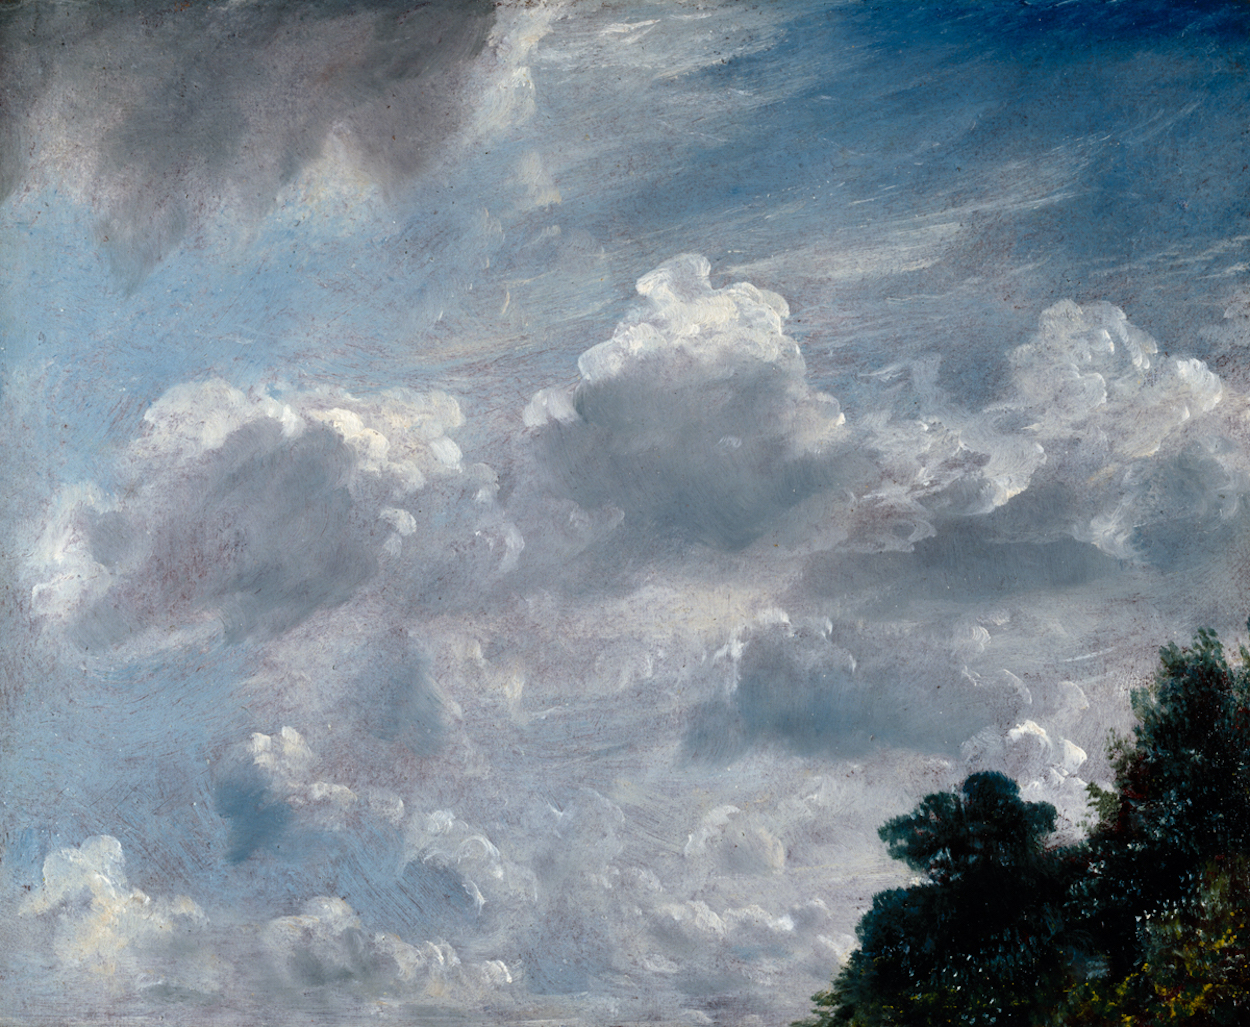 Cloud Study, Hampstead, Tree at Right by John Constable - 1821 - 24.1 x 29.9 cm Royal Academy of Arts